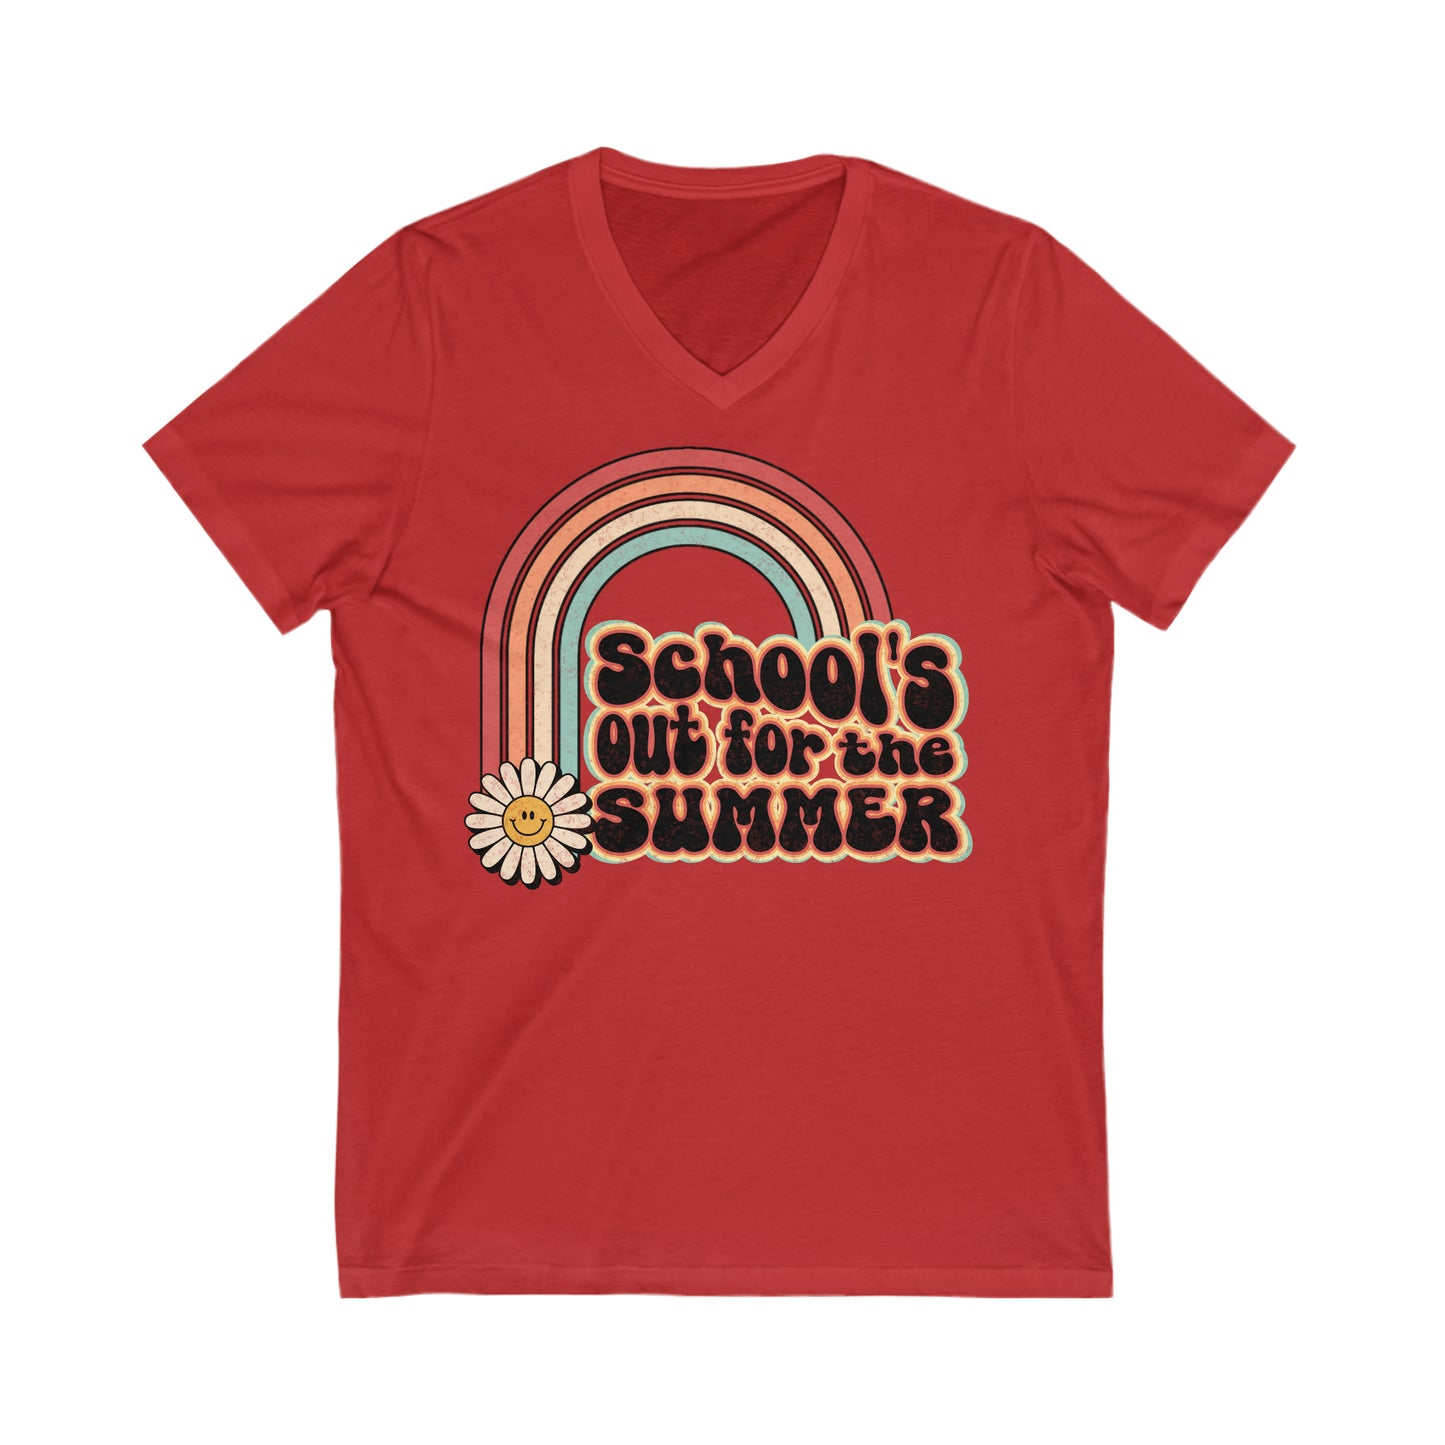 School’s out for the Summer - Unisex Jersey Short Sleeve V-Neck Tee